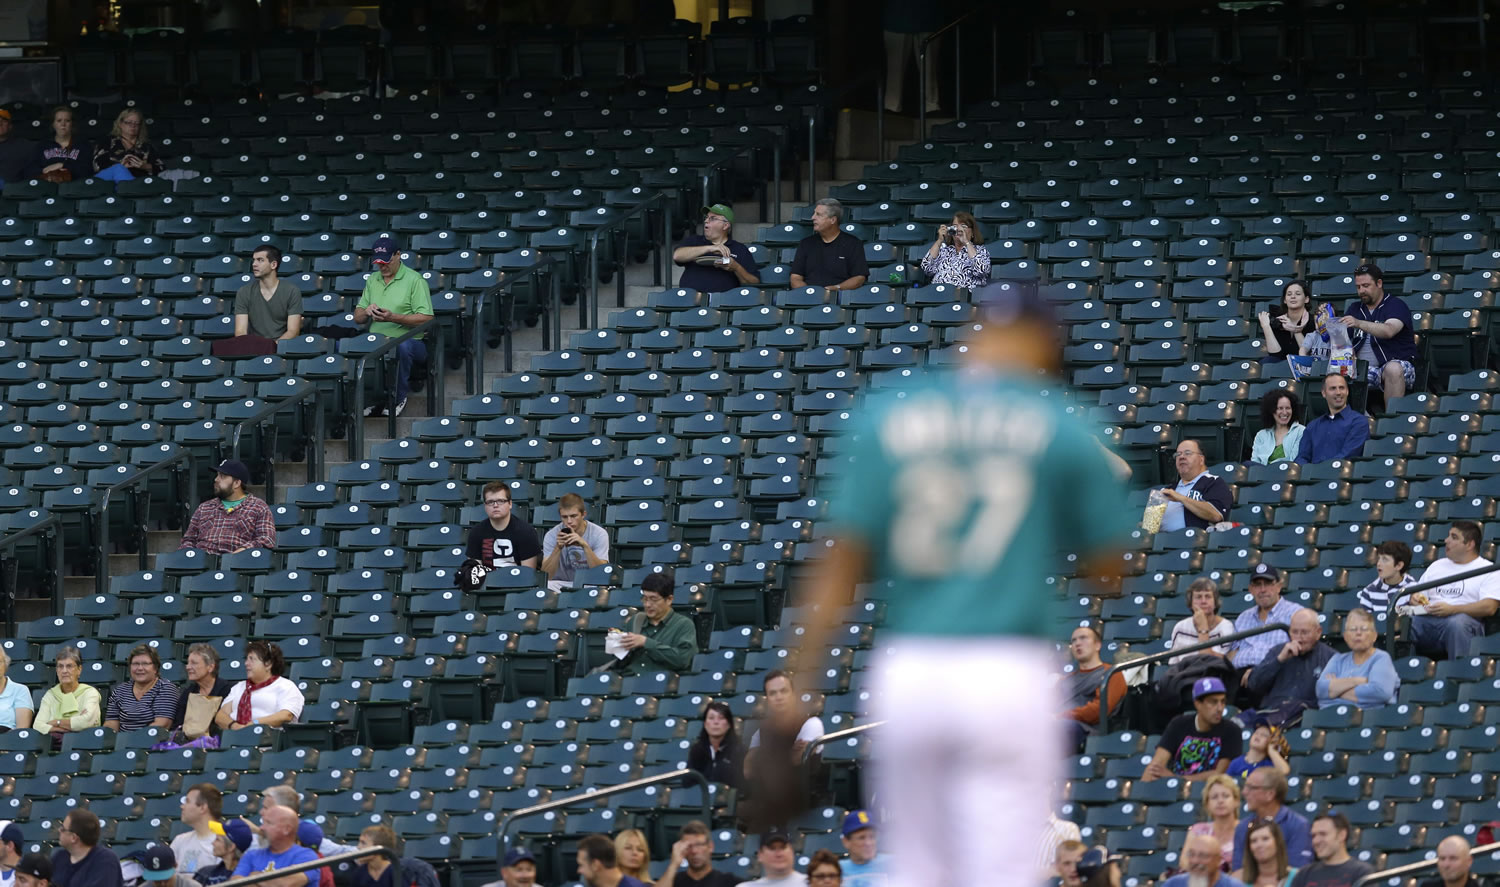 Only a few fans are in the stands near first base at Safeco Field as Seattle Mariners starting pitcher Taijuan Walker takes the mound for Monday's game against the Houston Astros.